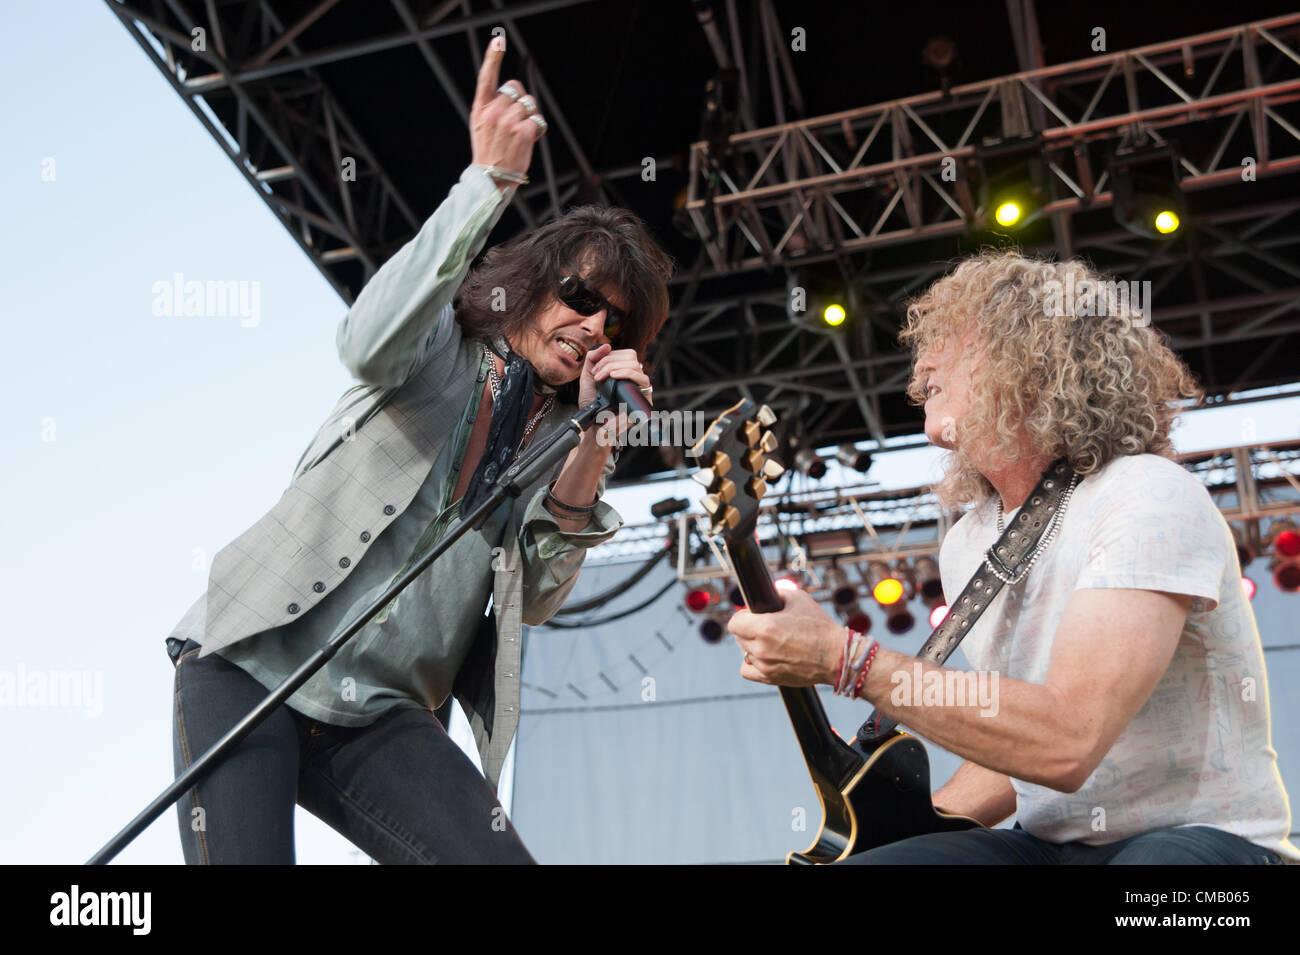 LINCOLN, CA - July 6: Foreigner performs at Thunder Valley Casino Resort in Lincoln, California on July 6, 2012 Stock Photo